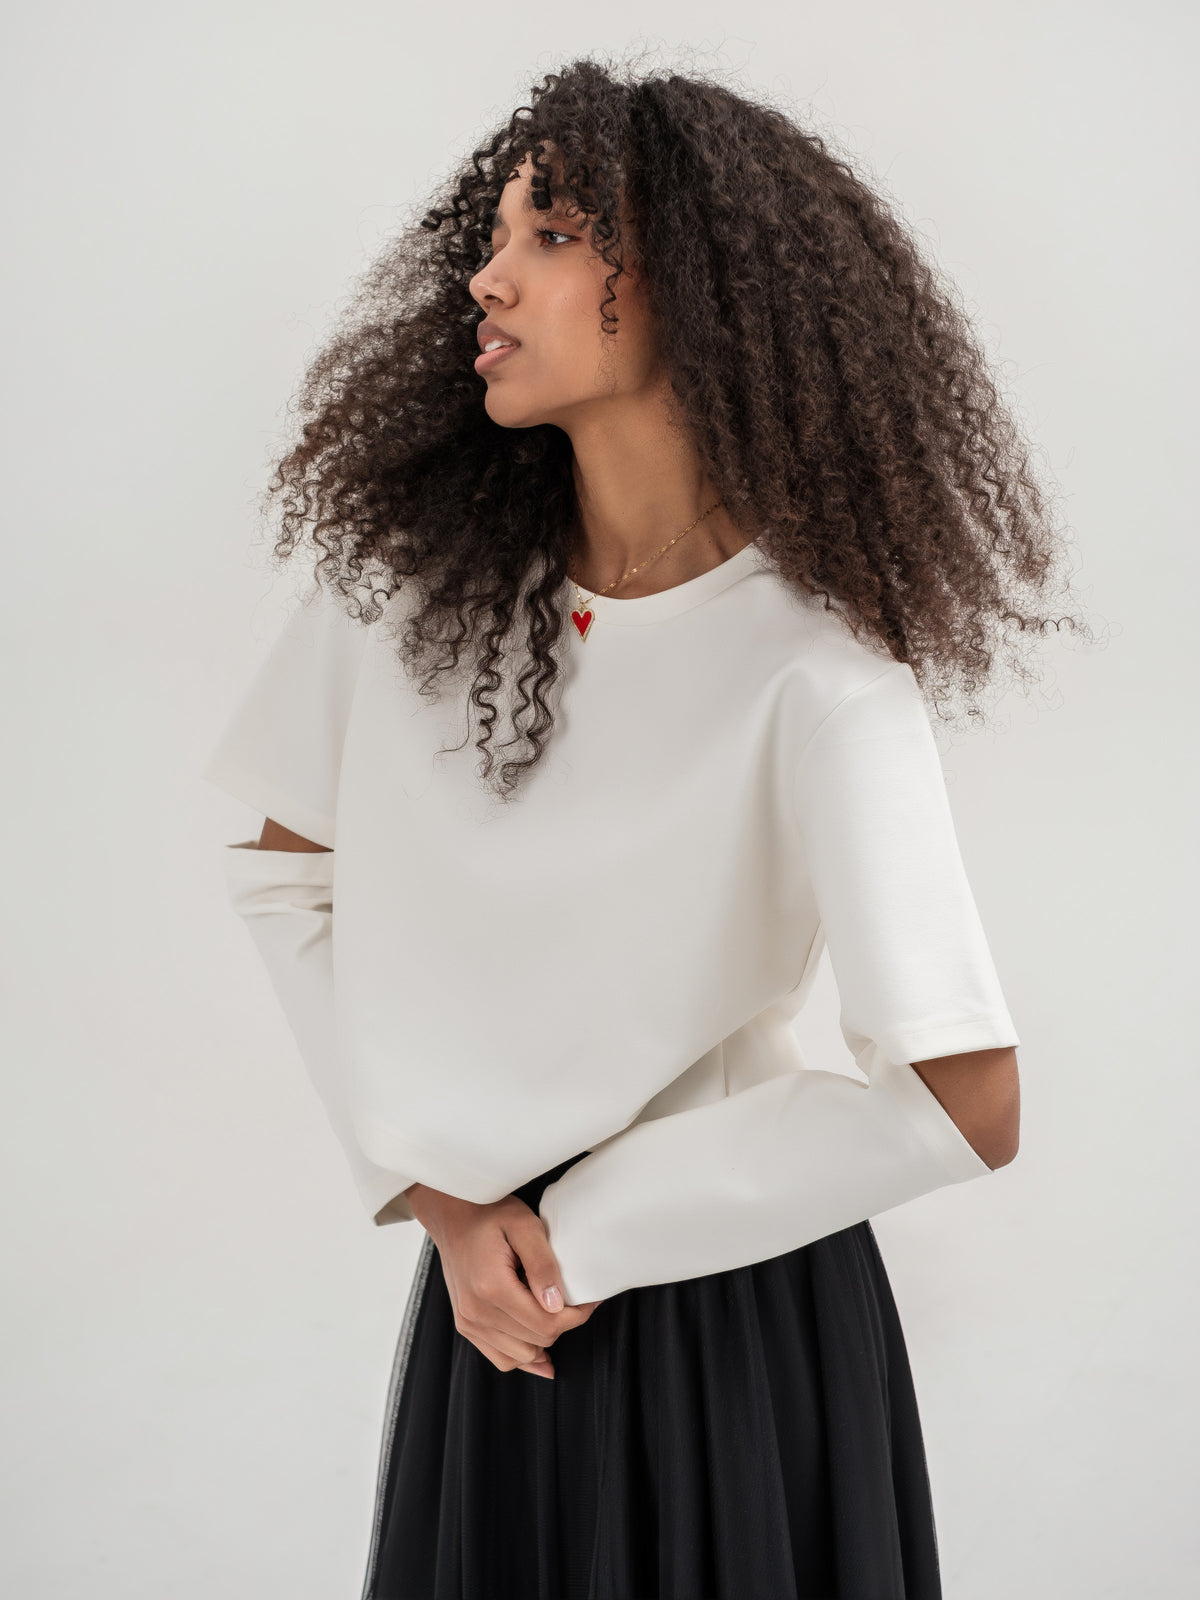 White top with slits in the elbow area